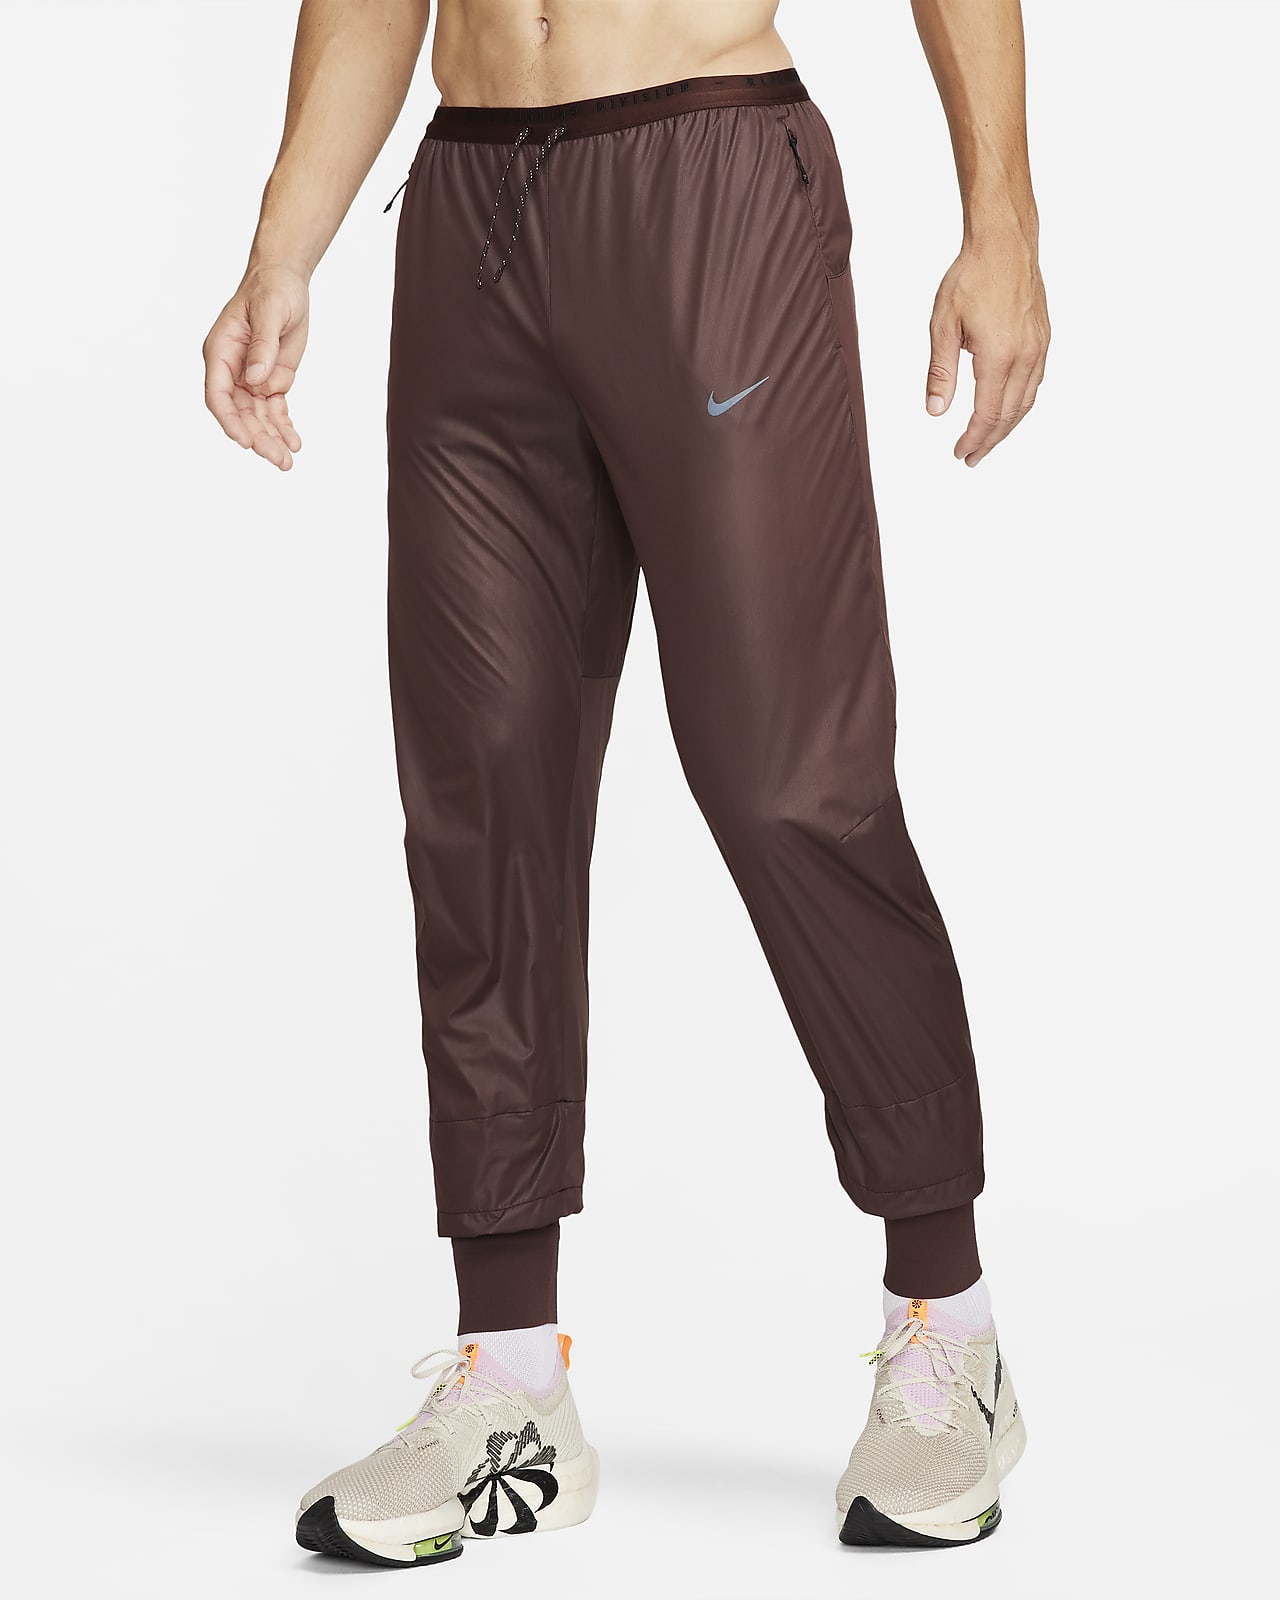 The Best Nike Running Pants.